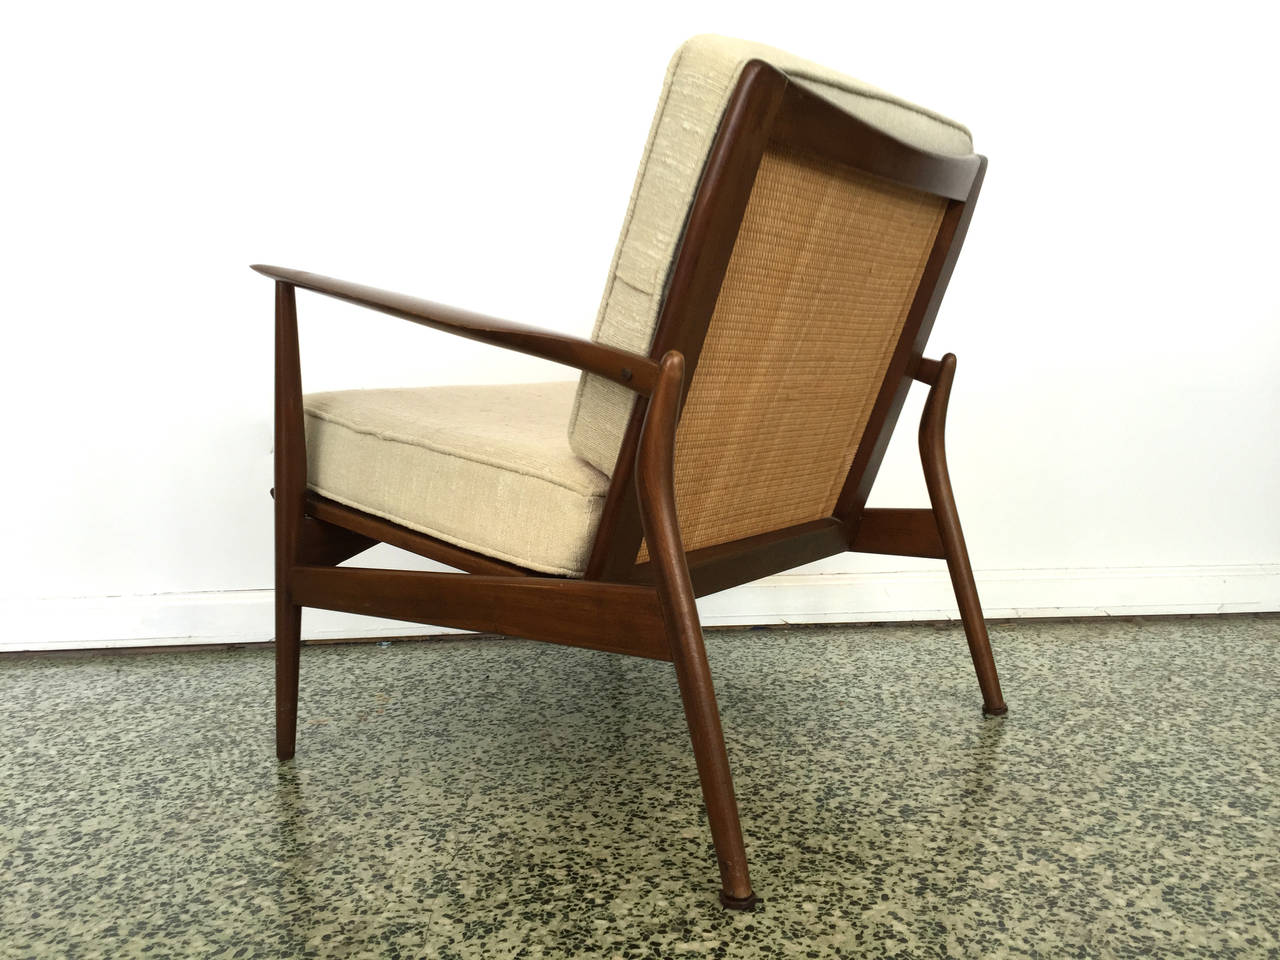 Ib Kofod-Larsen “Spear” chair for Selig. 2 available. refinishing recommended. 